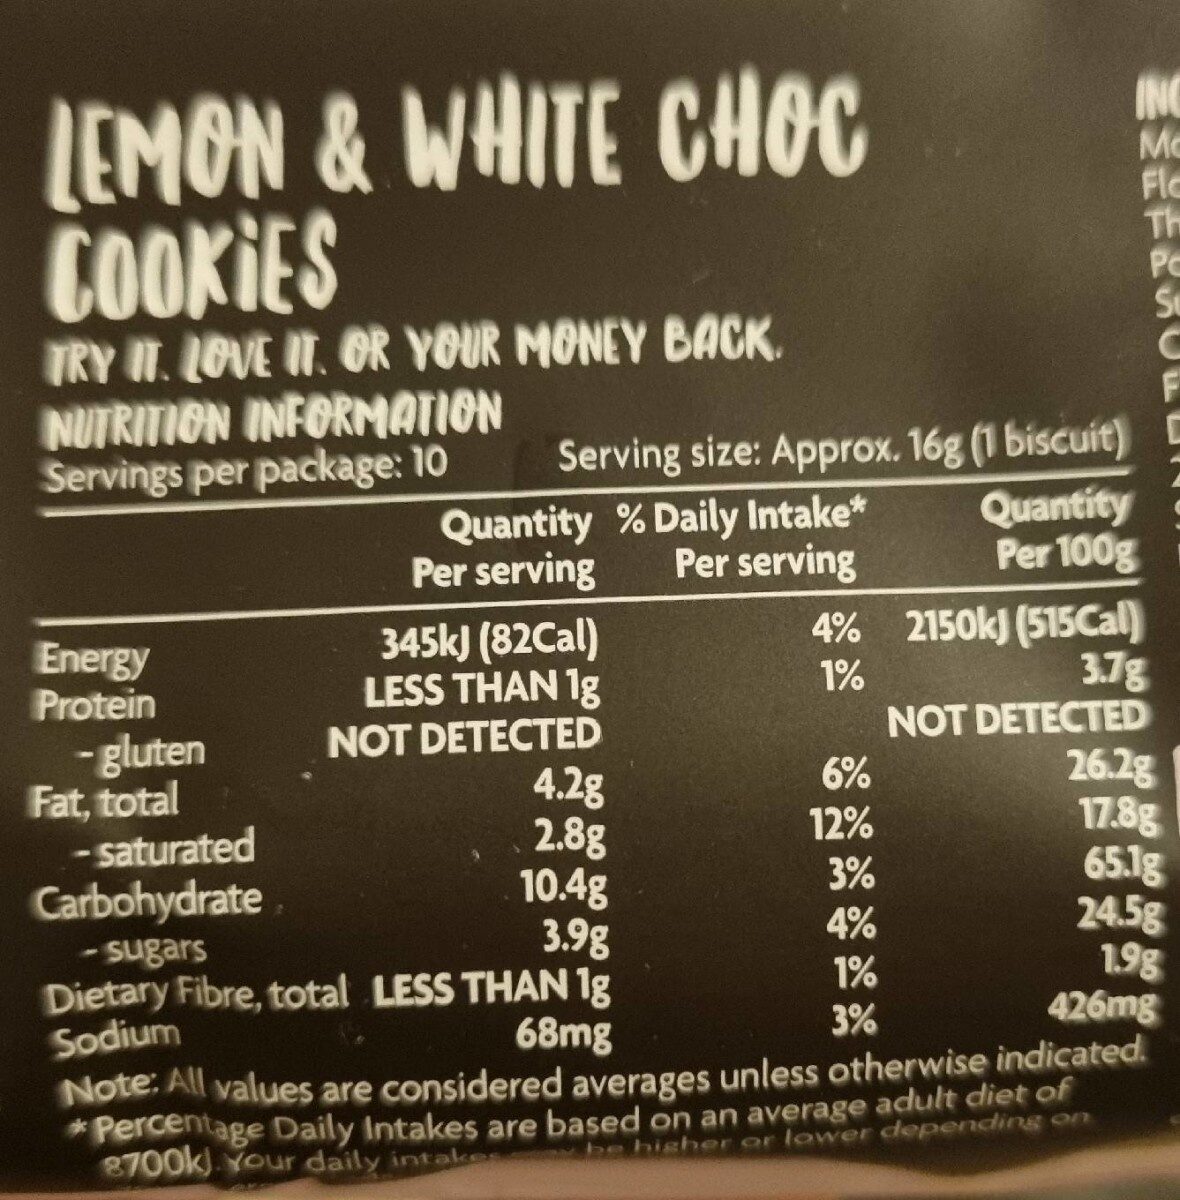 Lemon and white choc cookies - Nutrition facts